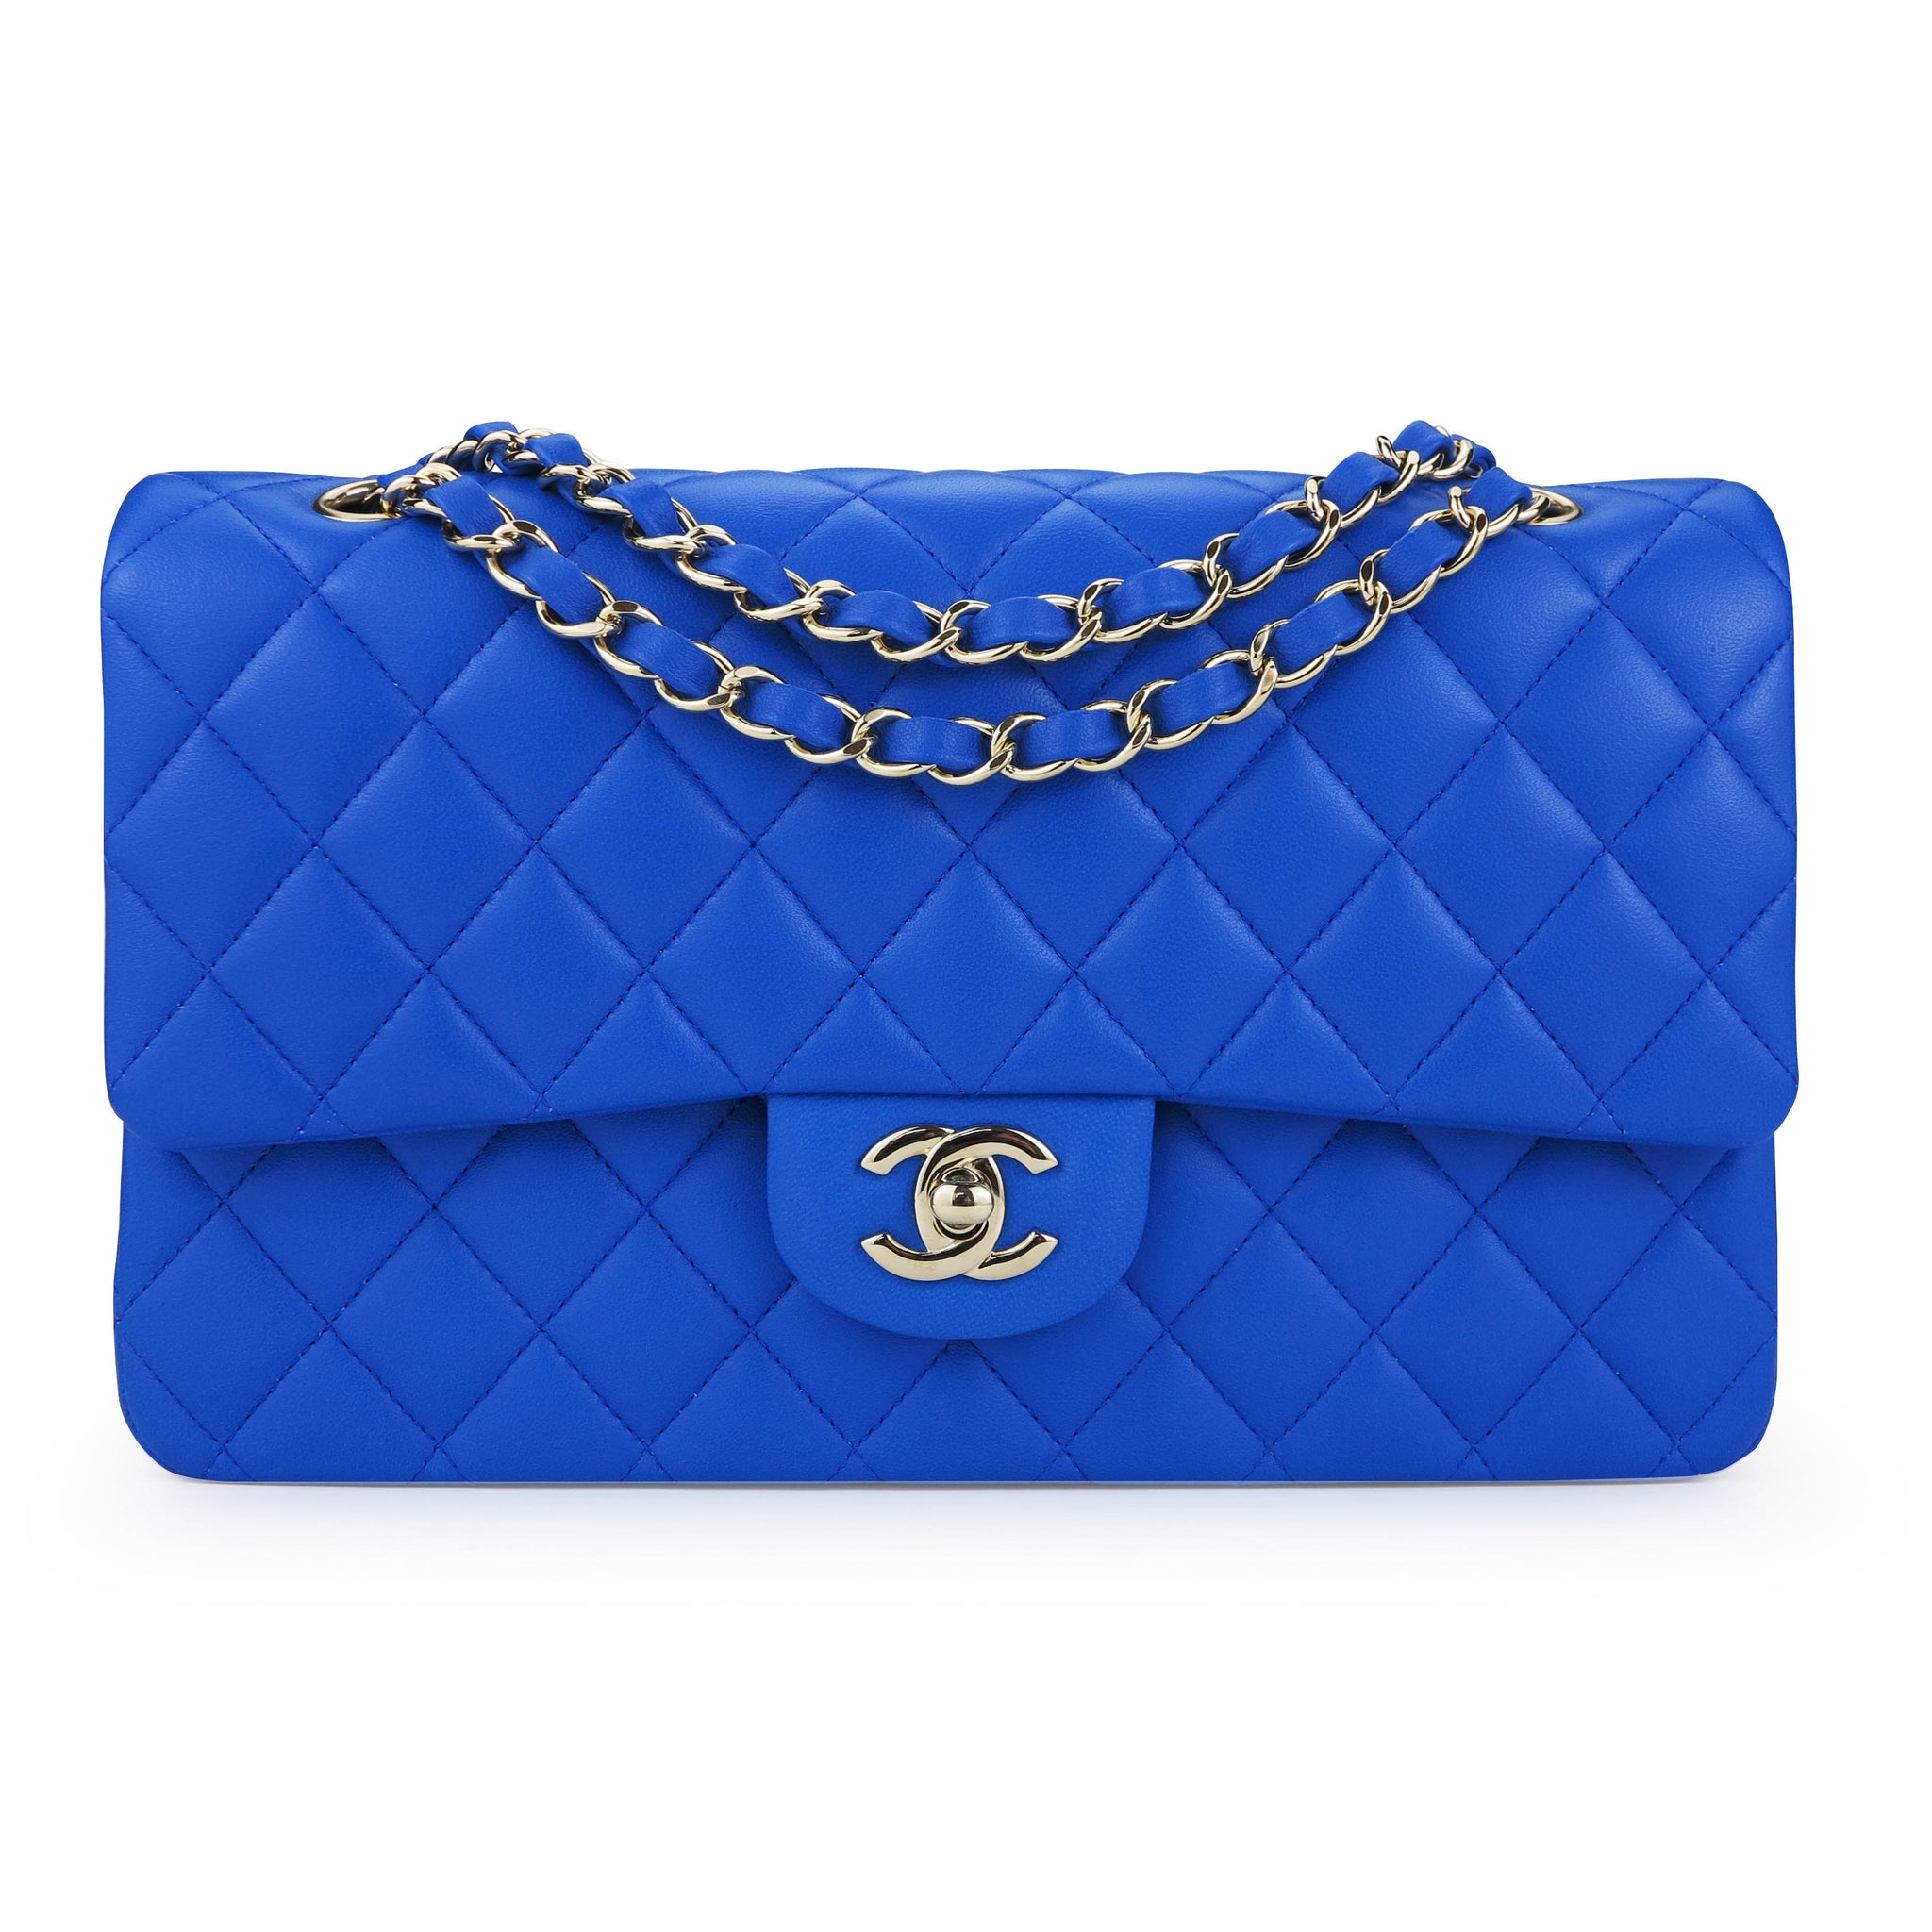 Chanel Large Royal Blue Bag SOLD  The White Dress Agency